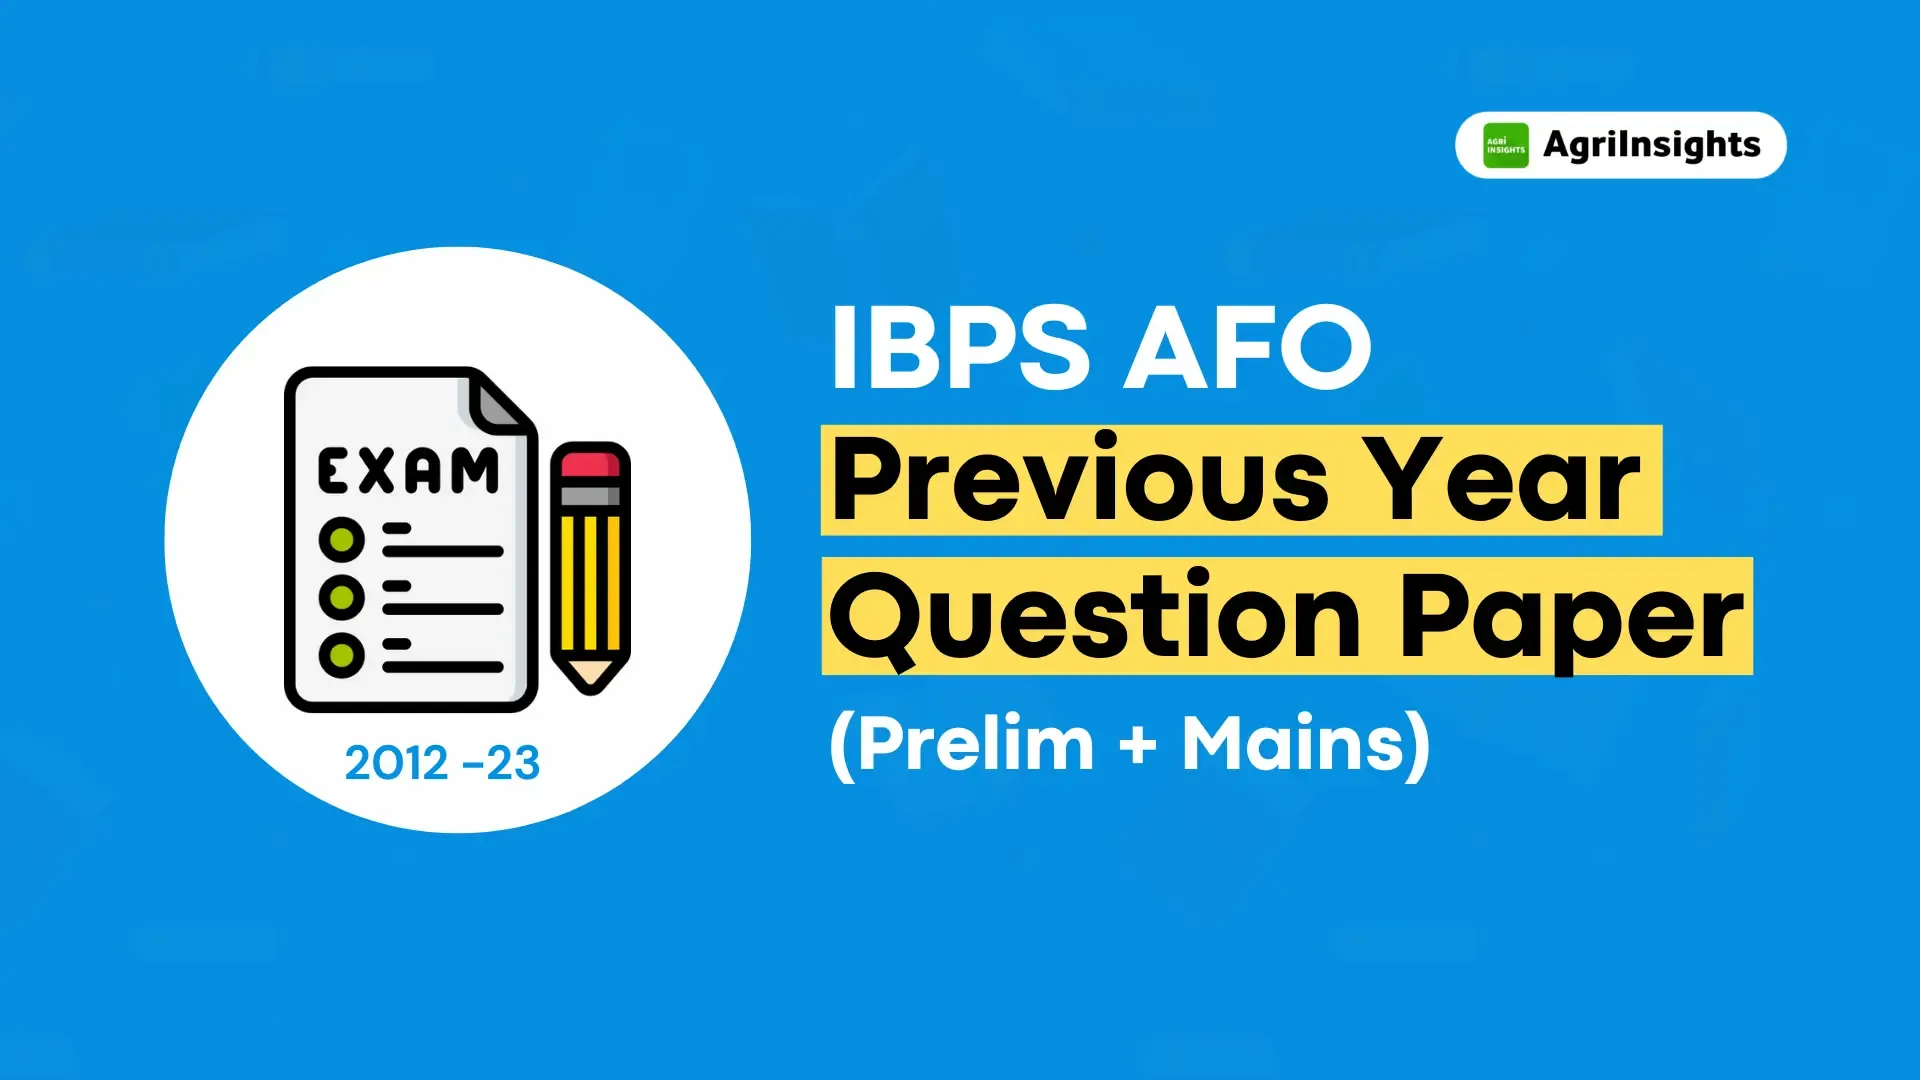 Download IBPS AFO 10 Years Old Papers  -  AgriInsights App